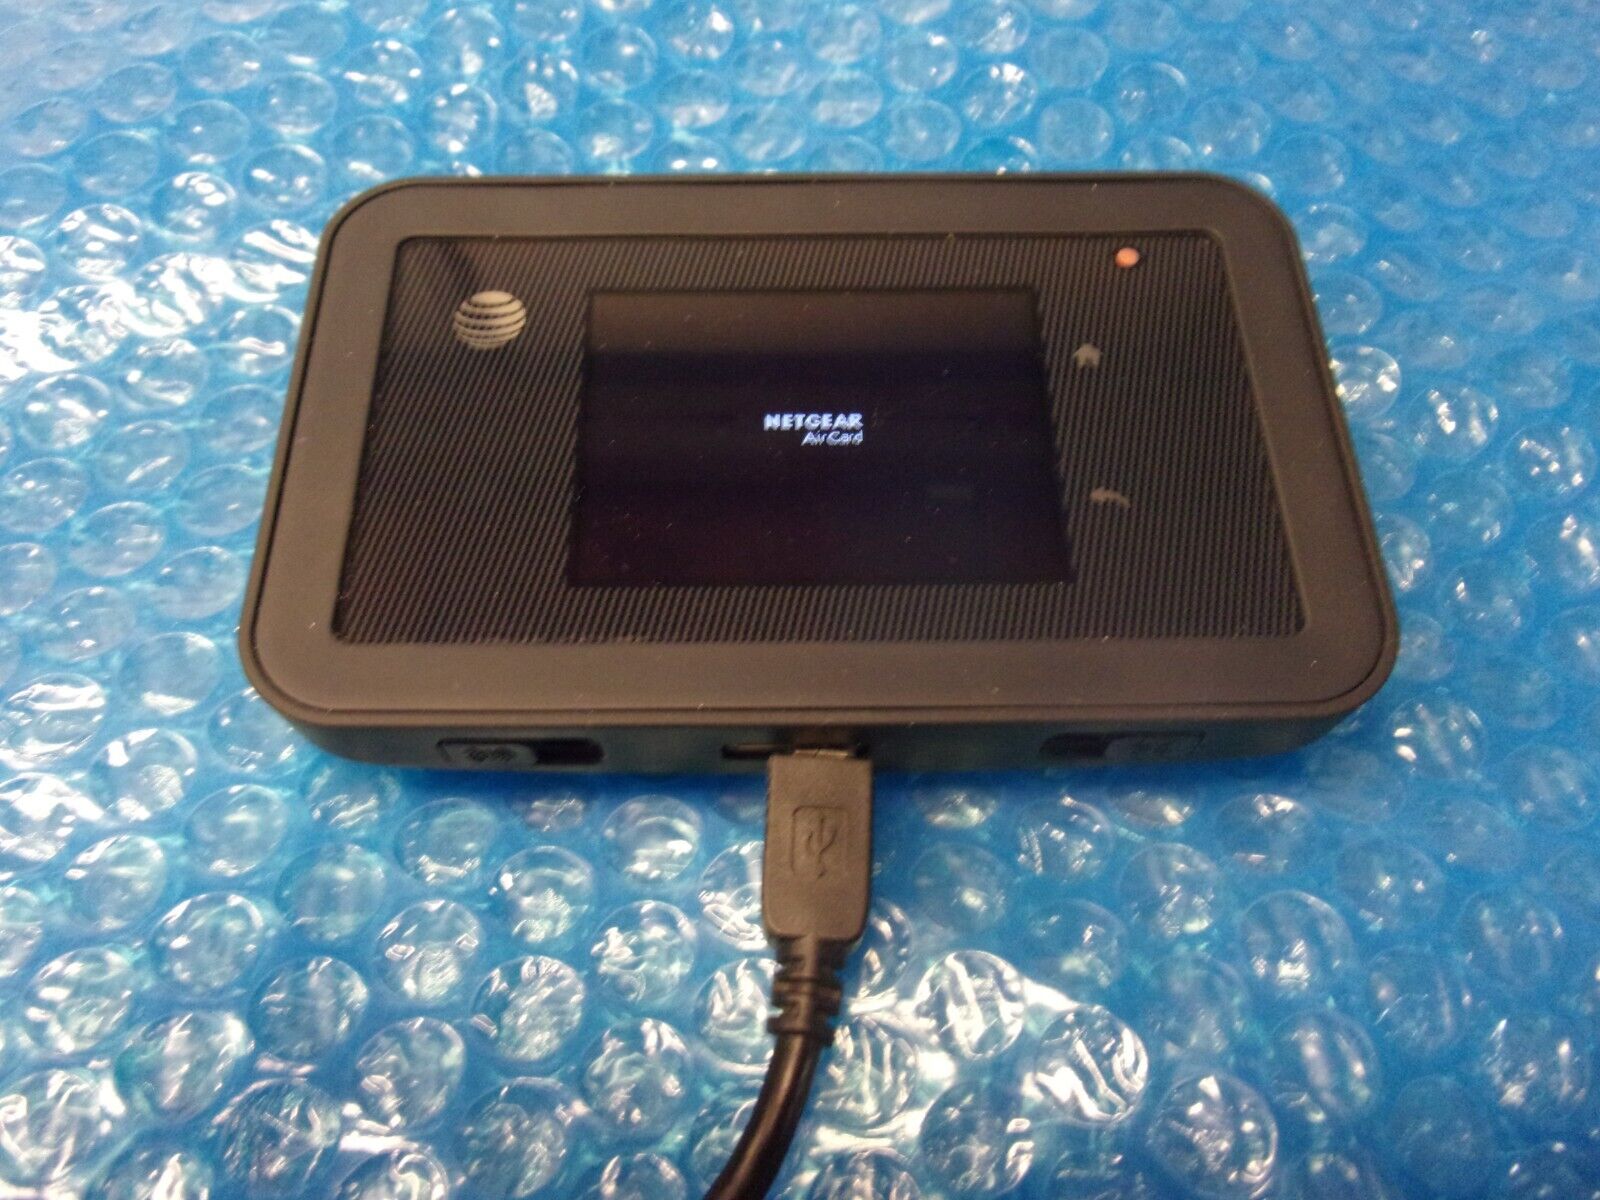 AT&T Unite Explore Netgear AirCard 815S Rugged Mobile Hotspot with Battery